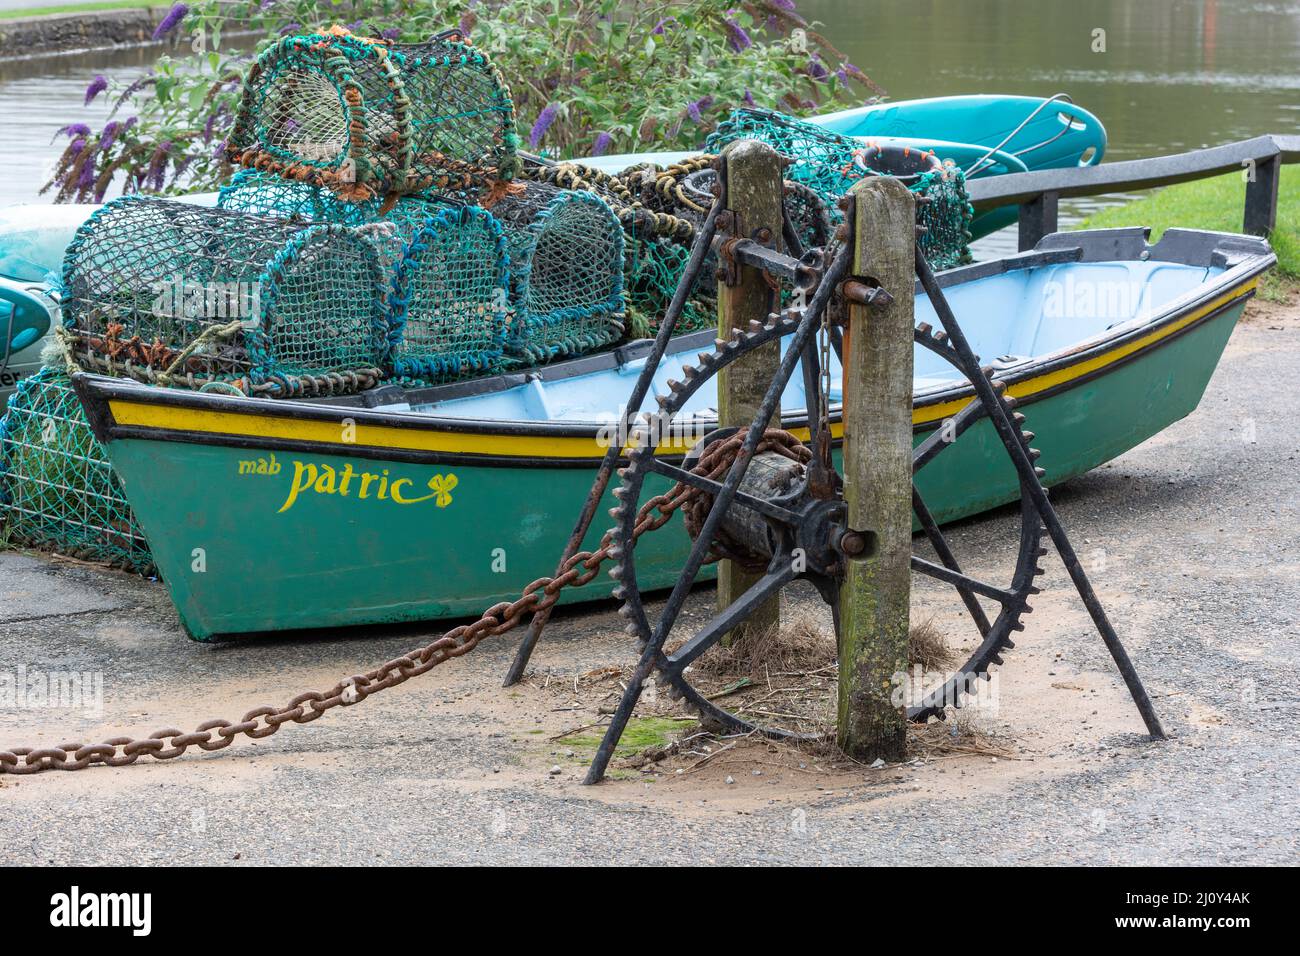 BUDE, CORNWALL, UK - AUGUST 15 : Rowing boat and lobster pots in Bude in Cornwall on August 15, 2013 Stock Photo